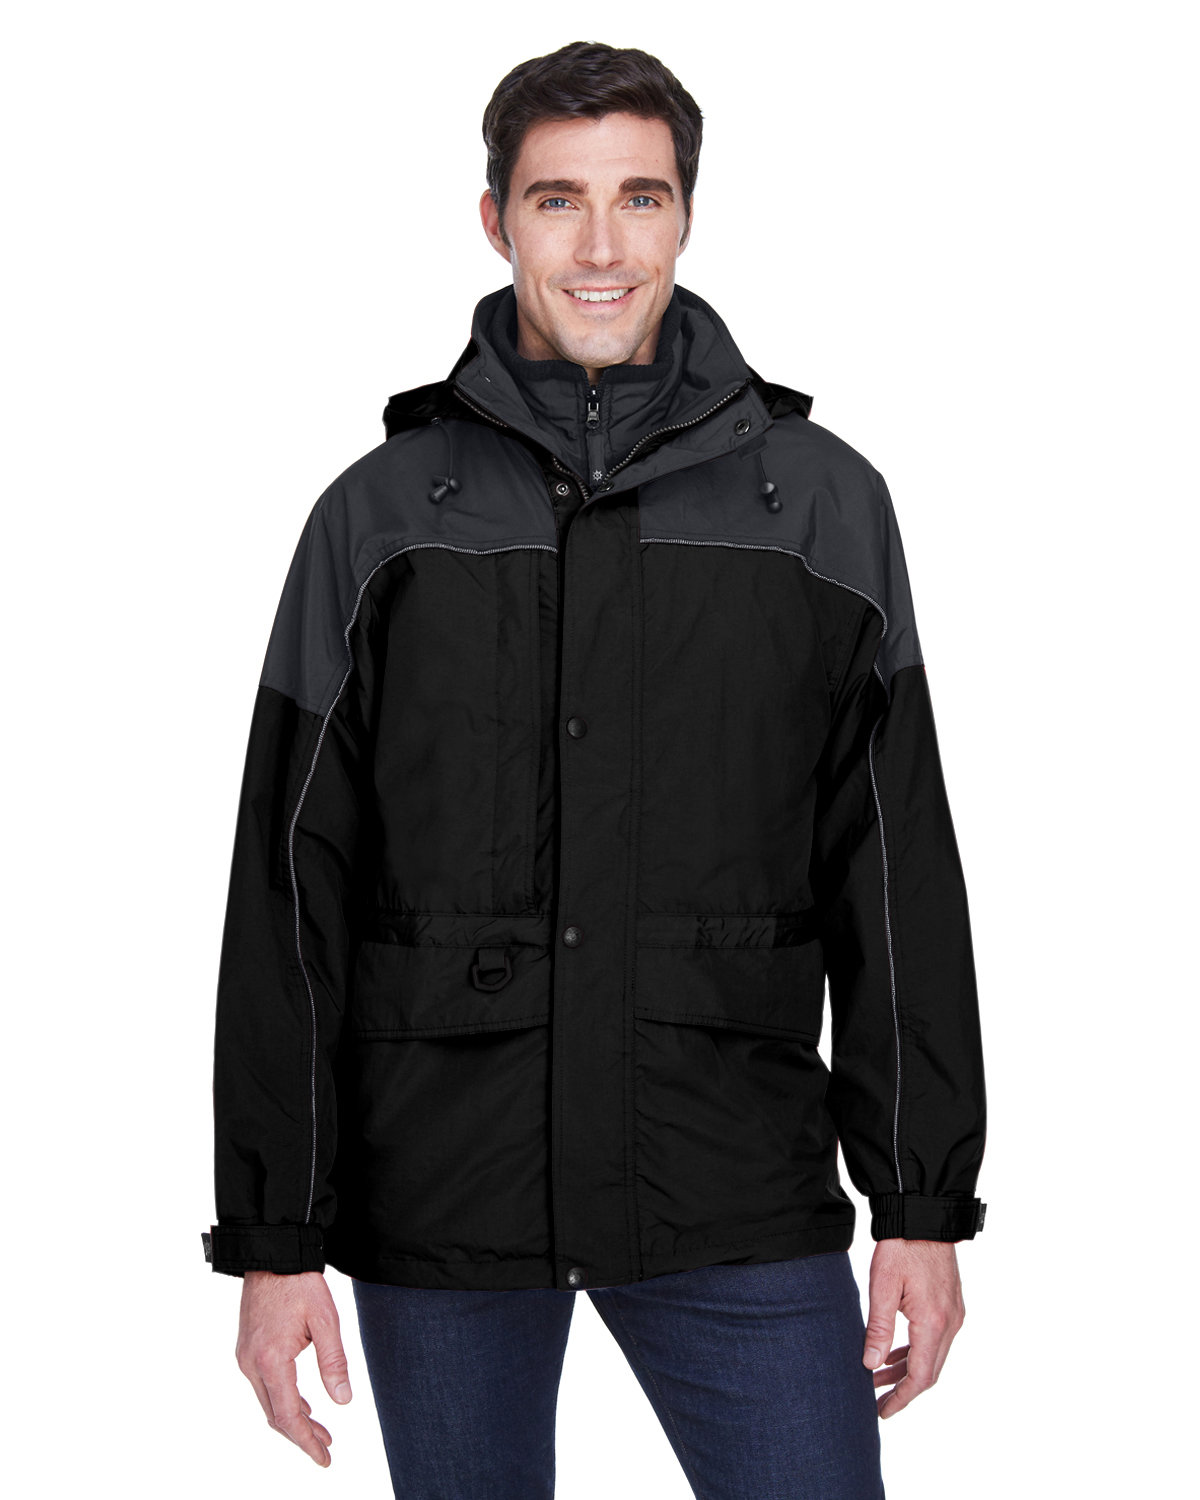 North End 88006 - Men's 3-in-1 Two-Tone Parka